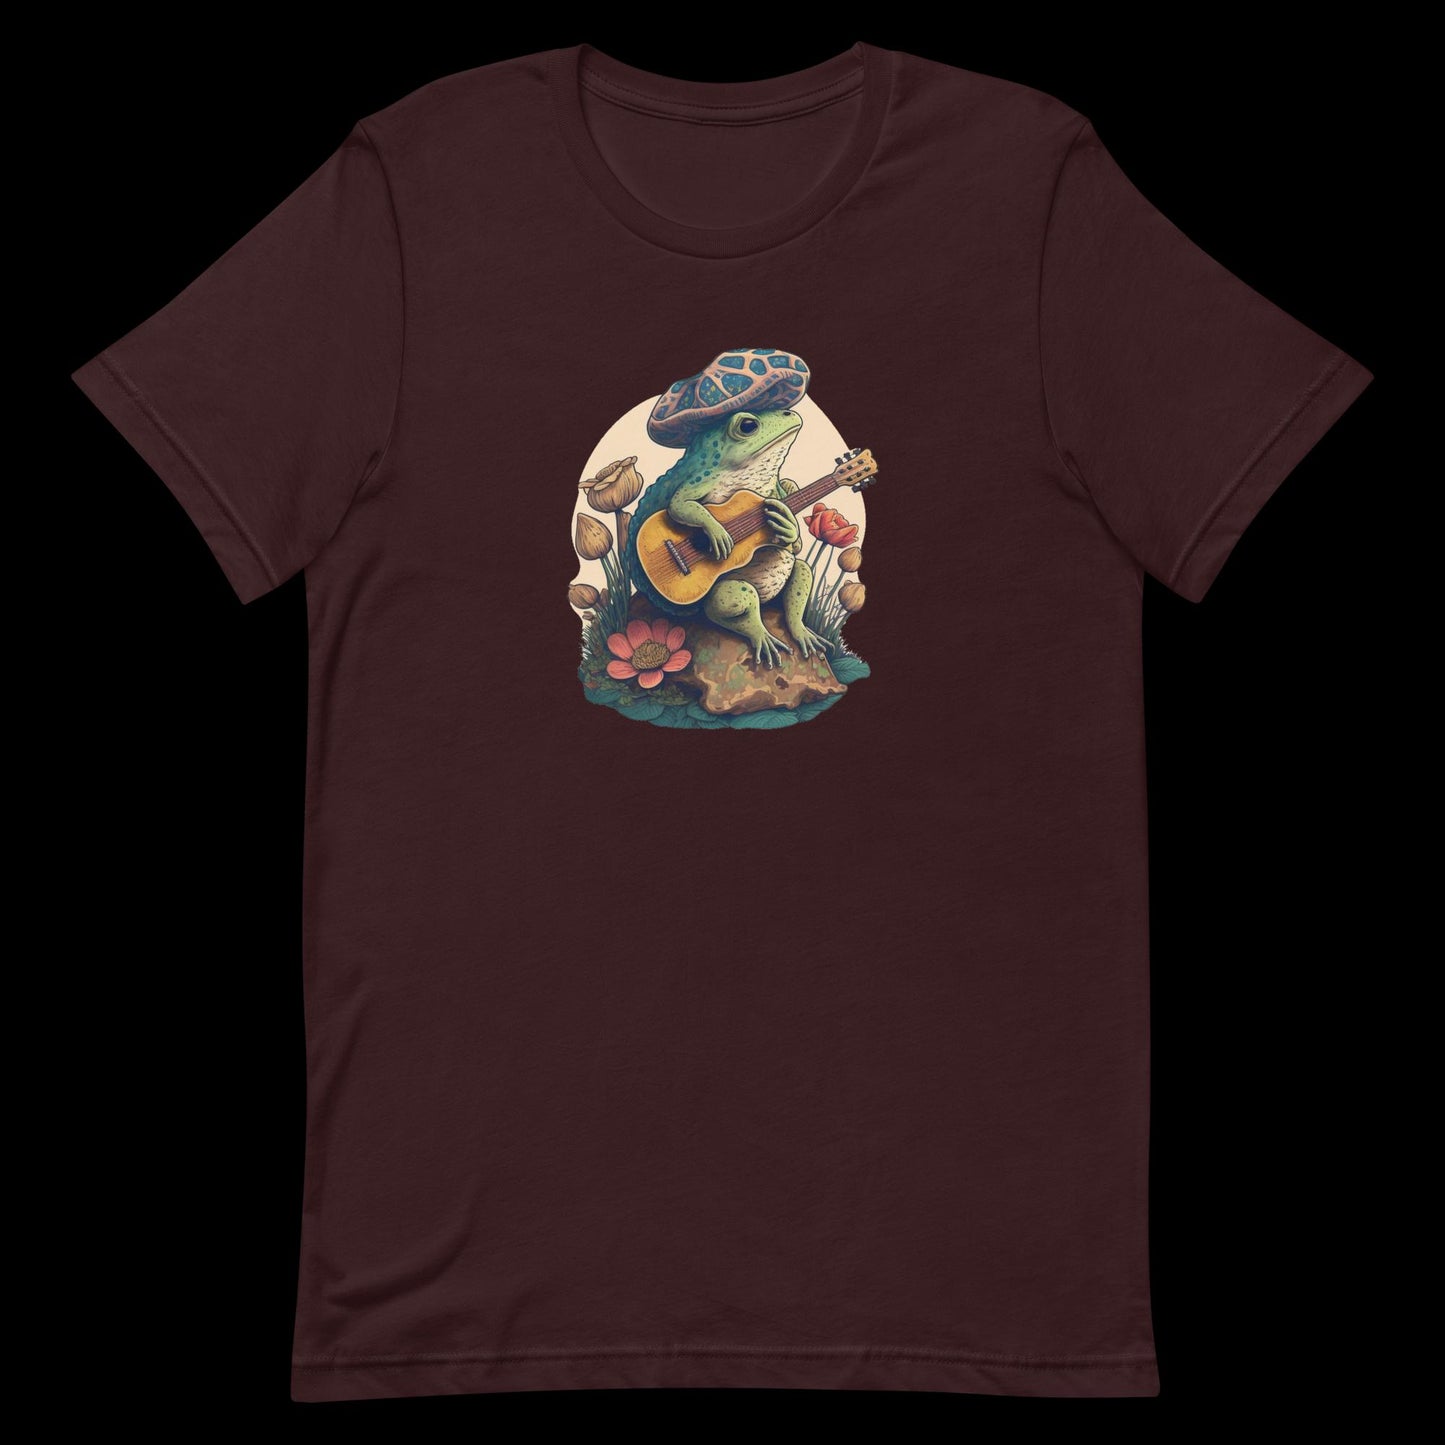 Frog On A Rock With A Guitar - Unisex T-Shirt